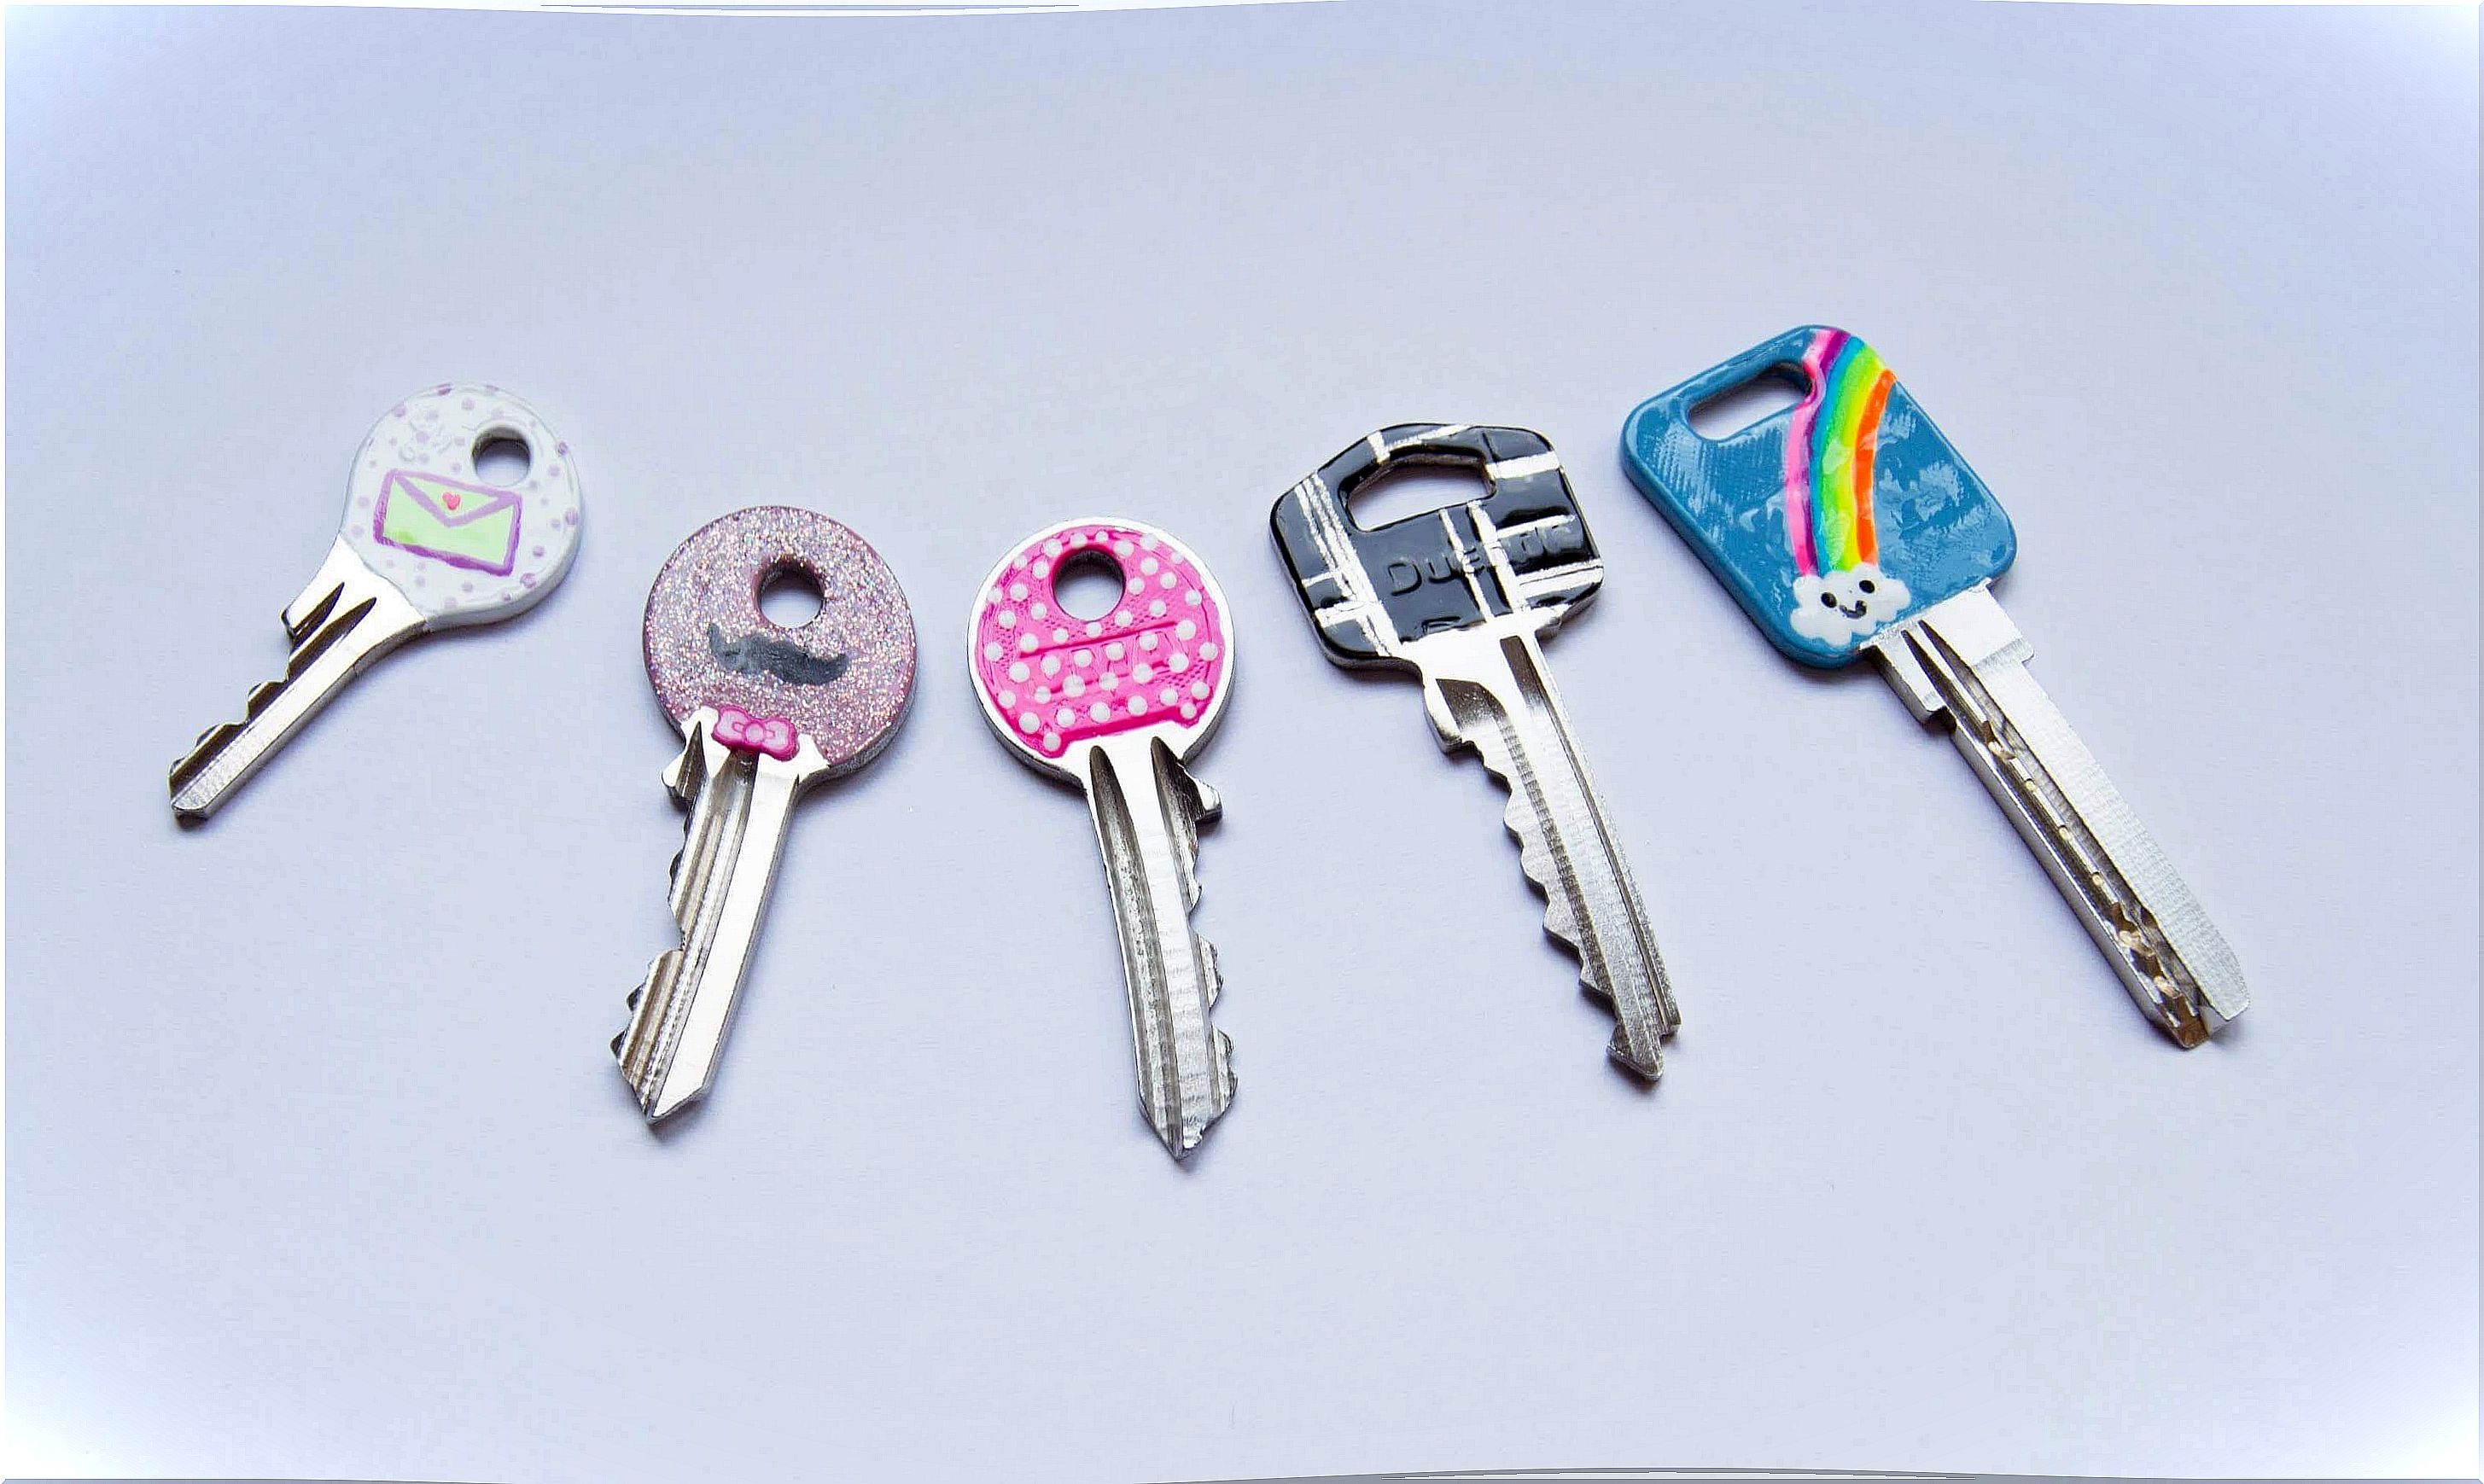 thanks to nail polish, you can differentiate your keys